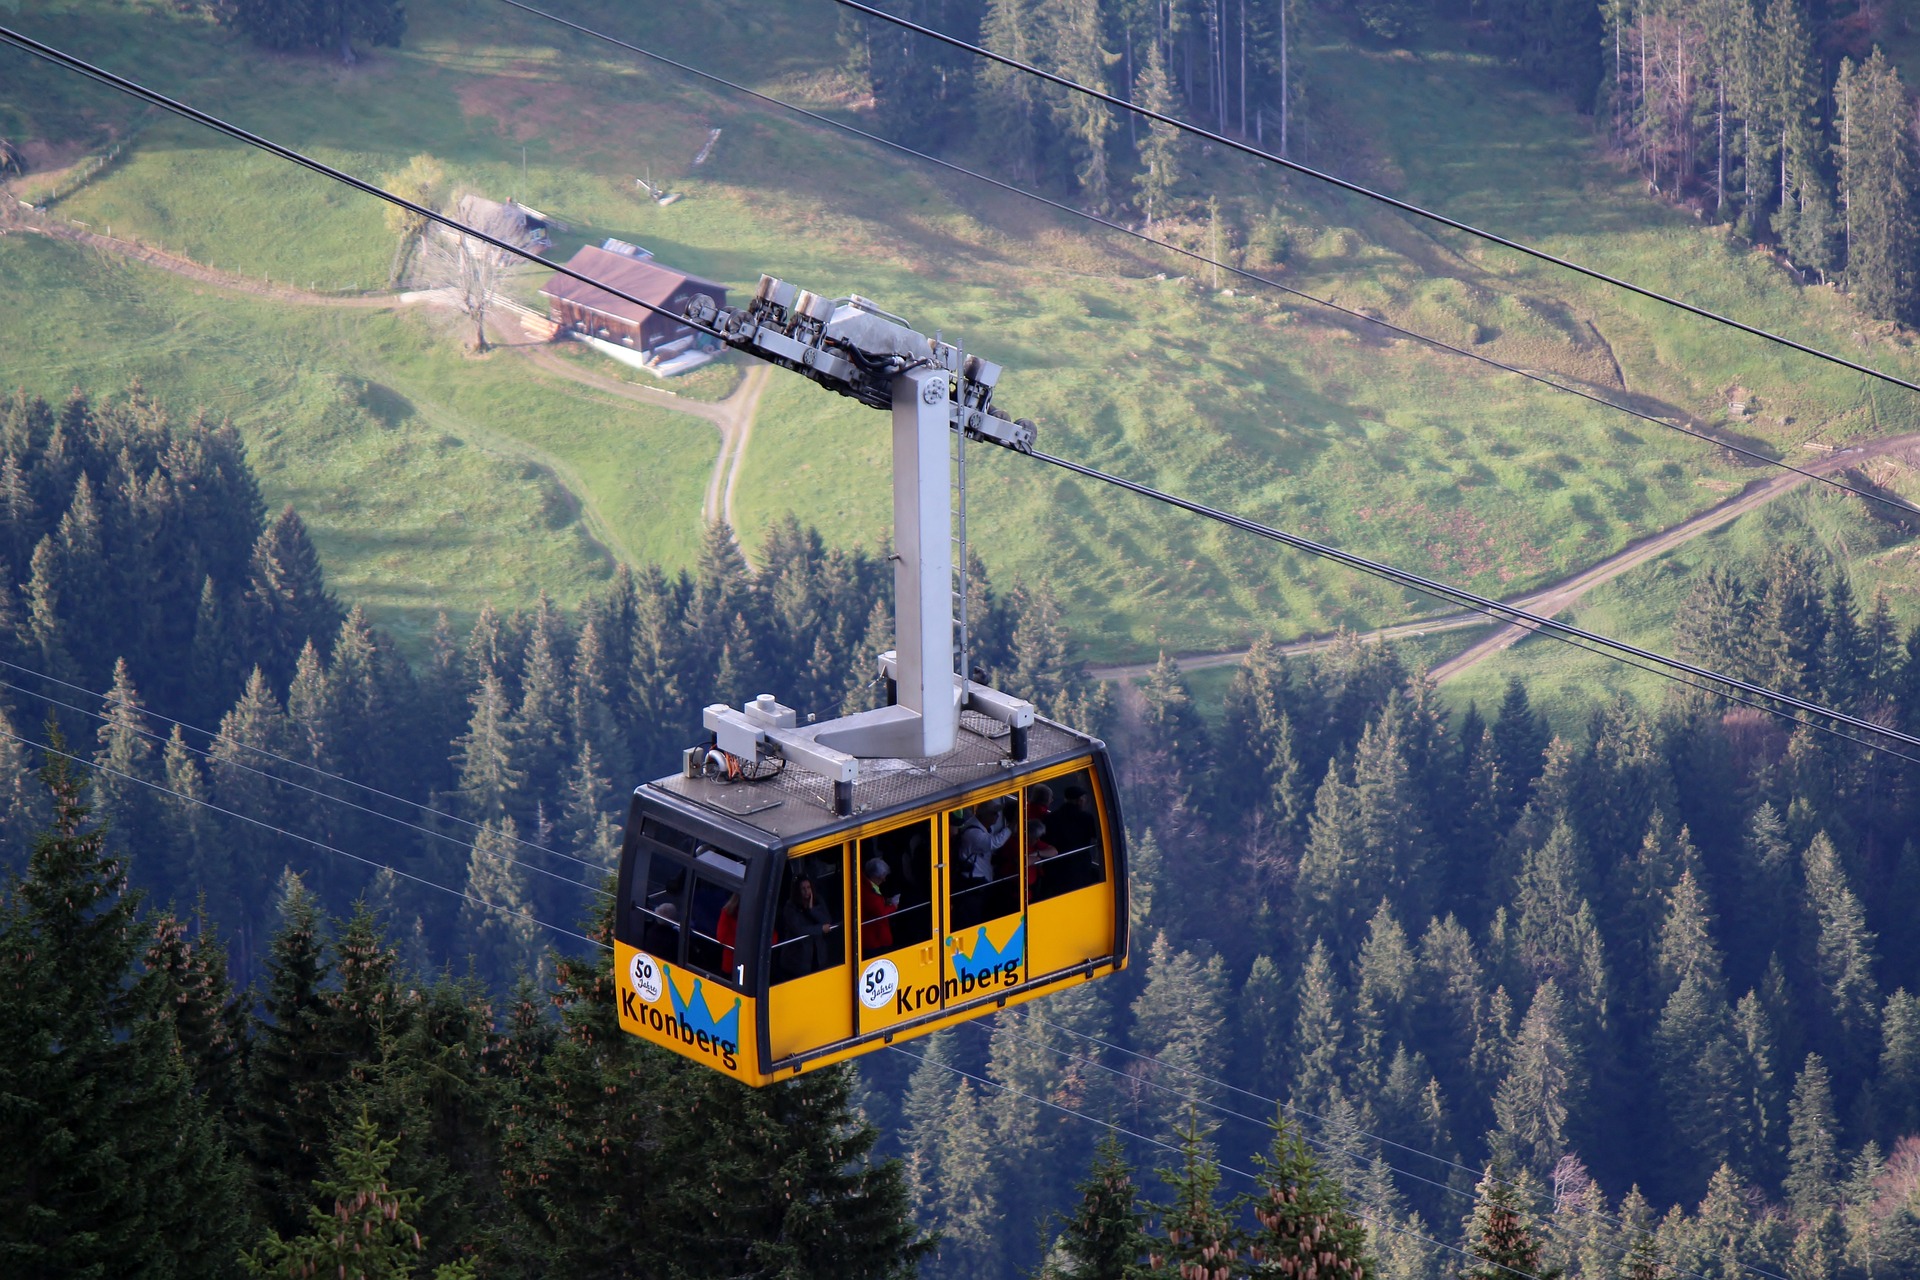 The Jackson Hole Aerial Tramway